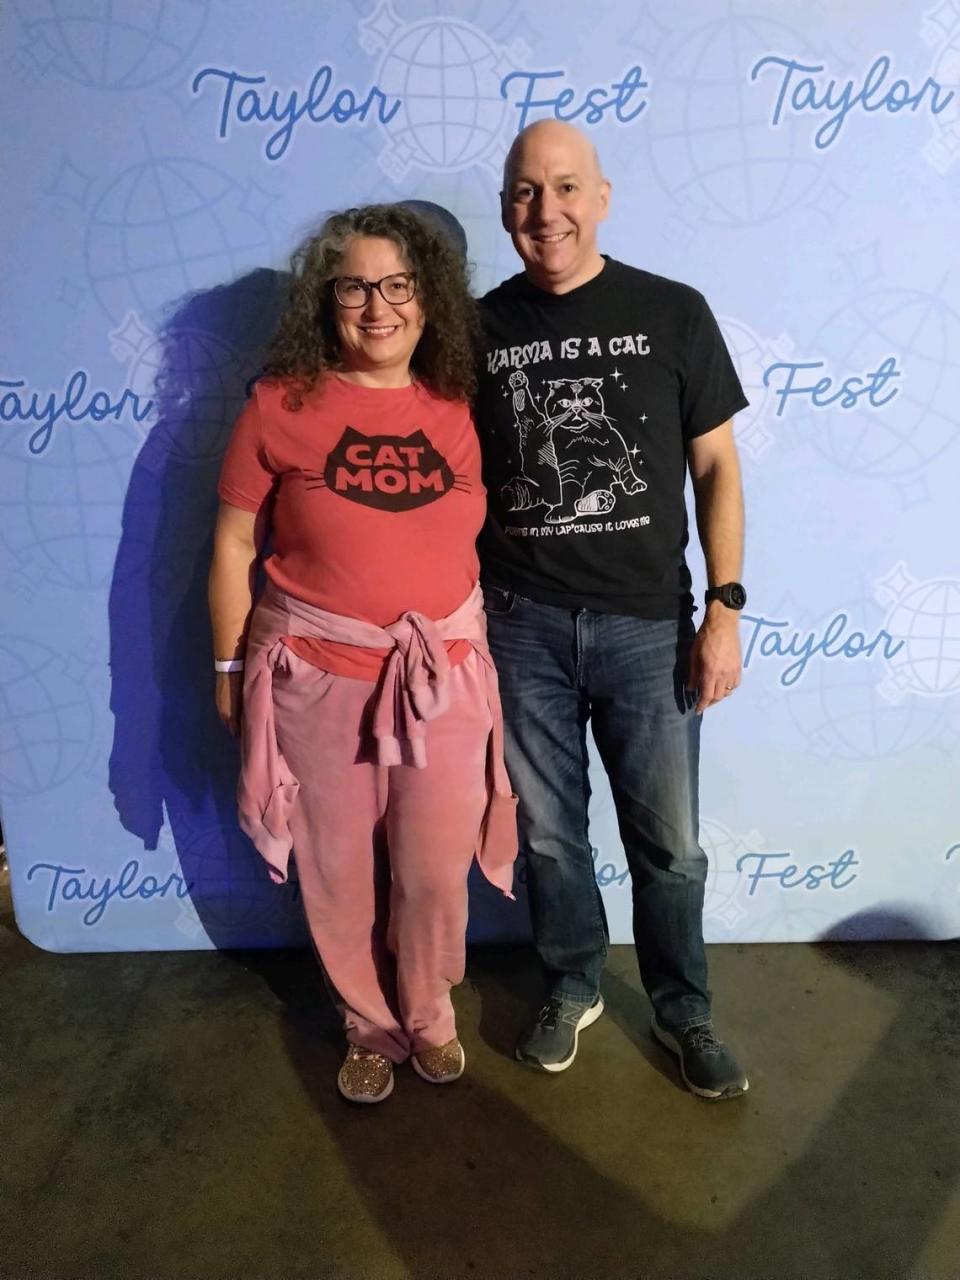 University of Kansas sociology professor Brian Donovan, and his wife, Natalie Donovan, have tickets to one of Taylor Swift’s July concerts in Kansas City. She’s going to wear a custom dress decorated with images of Swift’s cats.